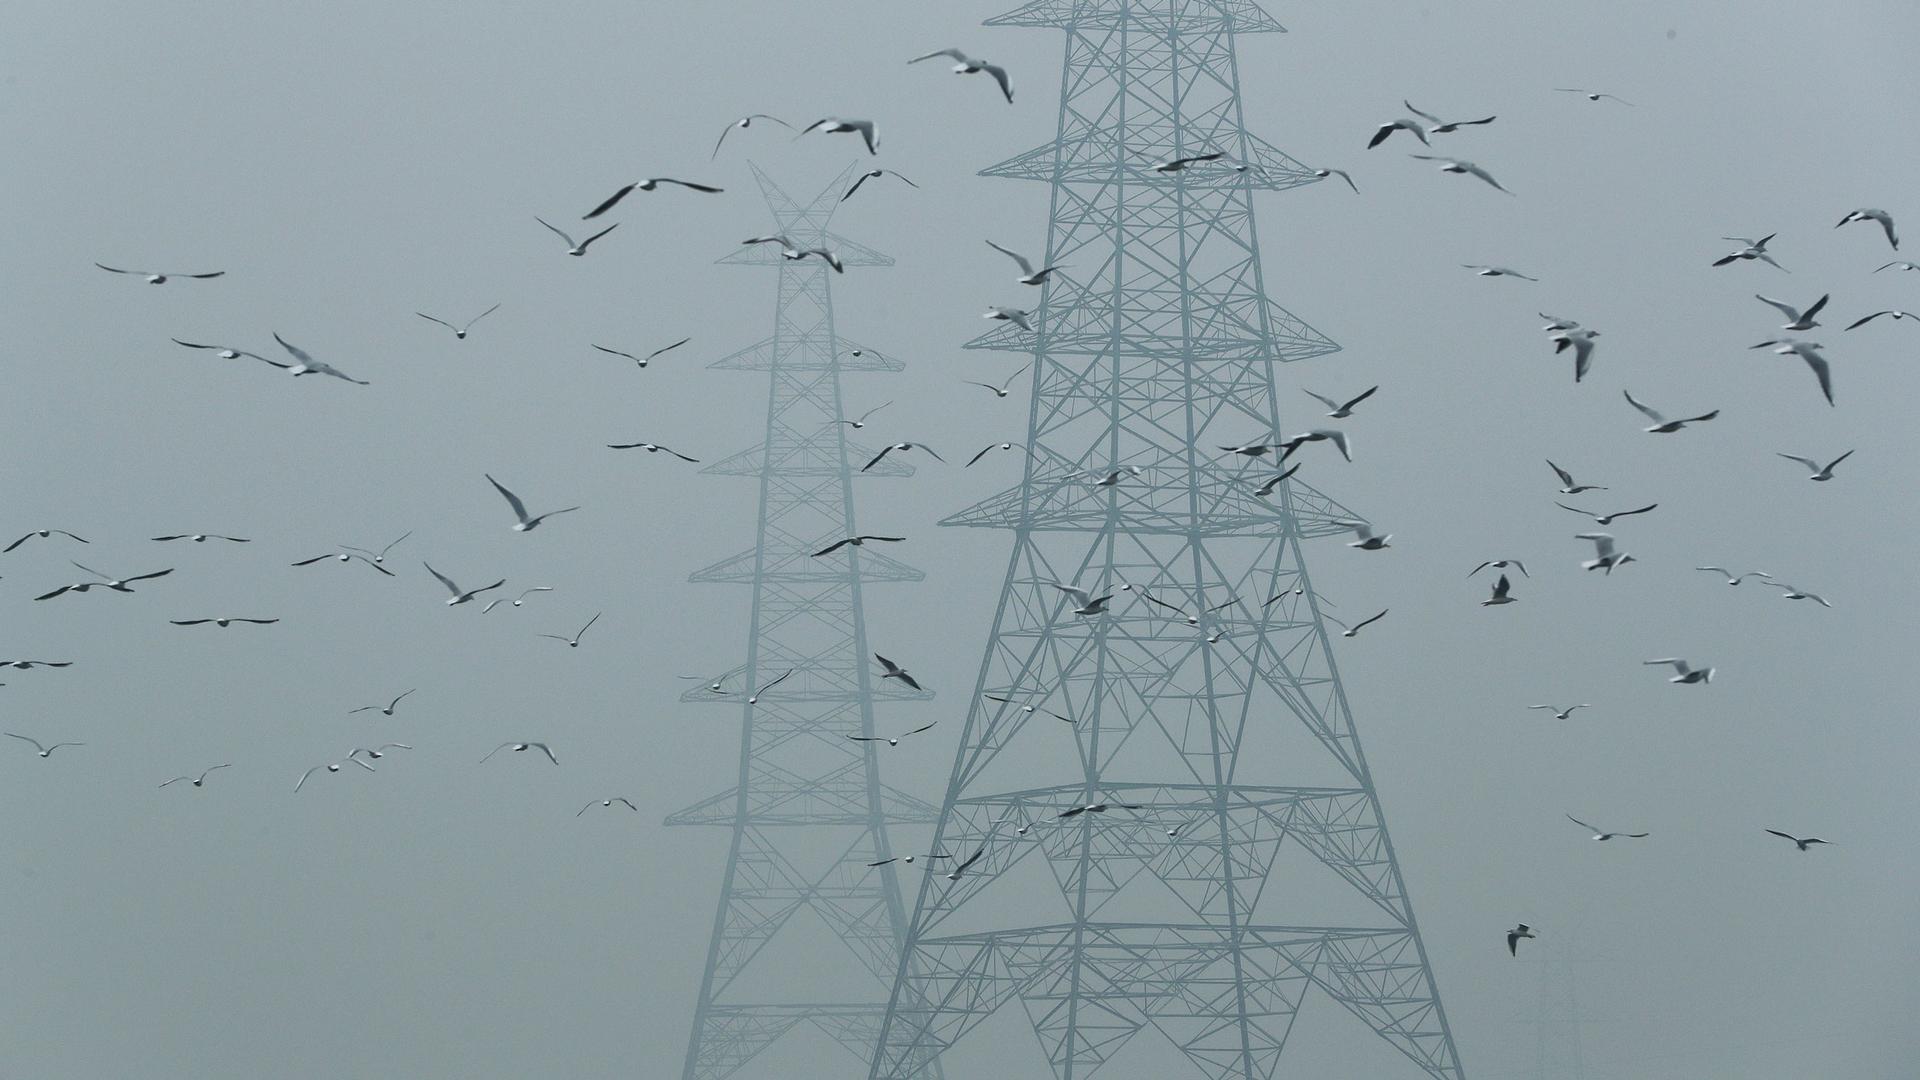 Dozens of birds are shown flying next to large electricity pylons on a smoggy afternoon.